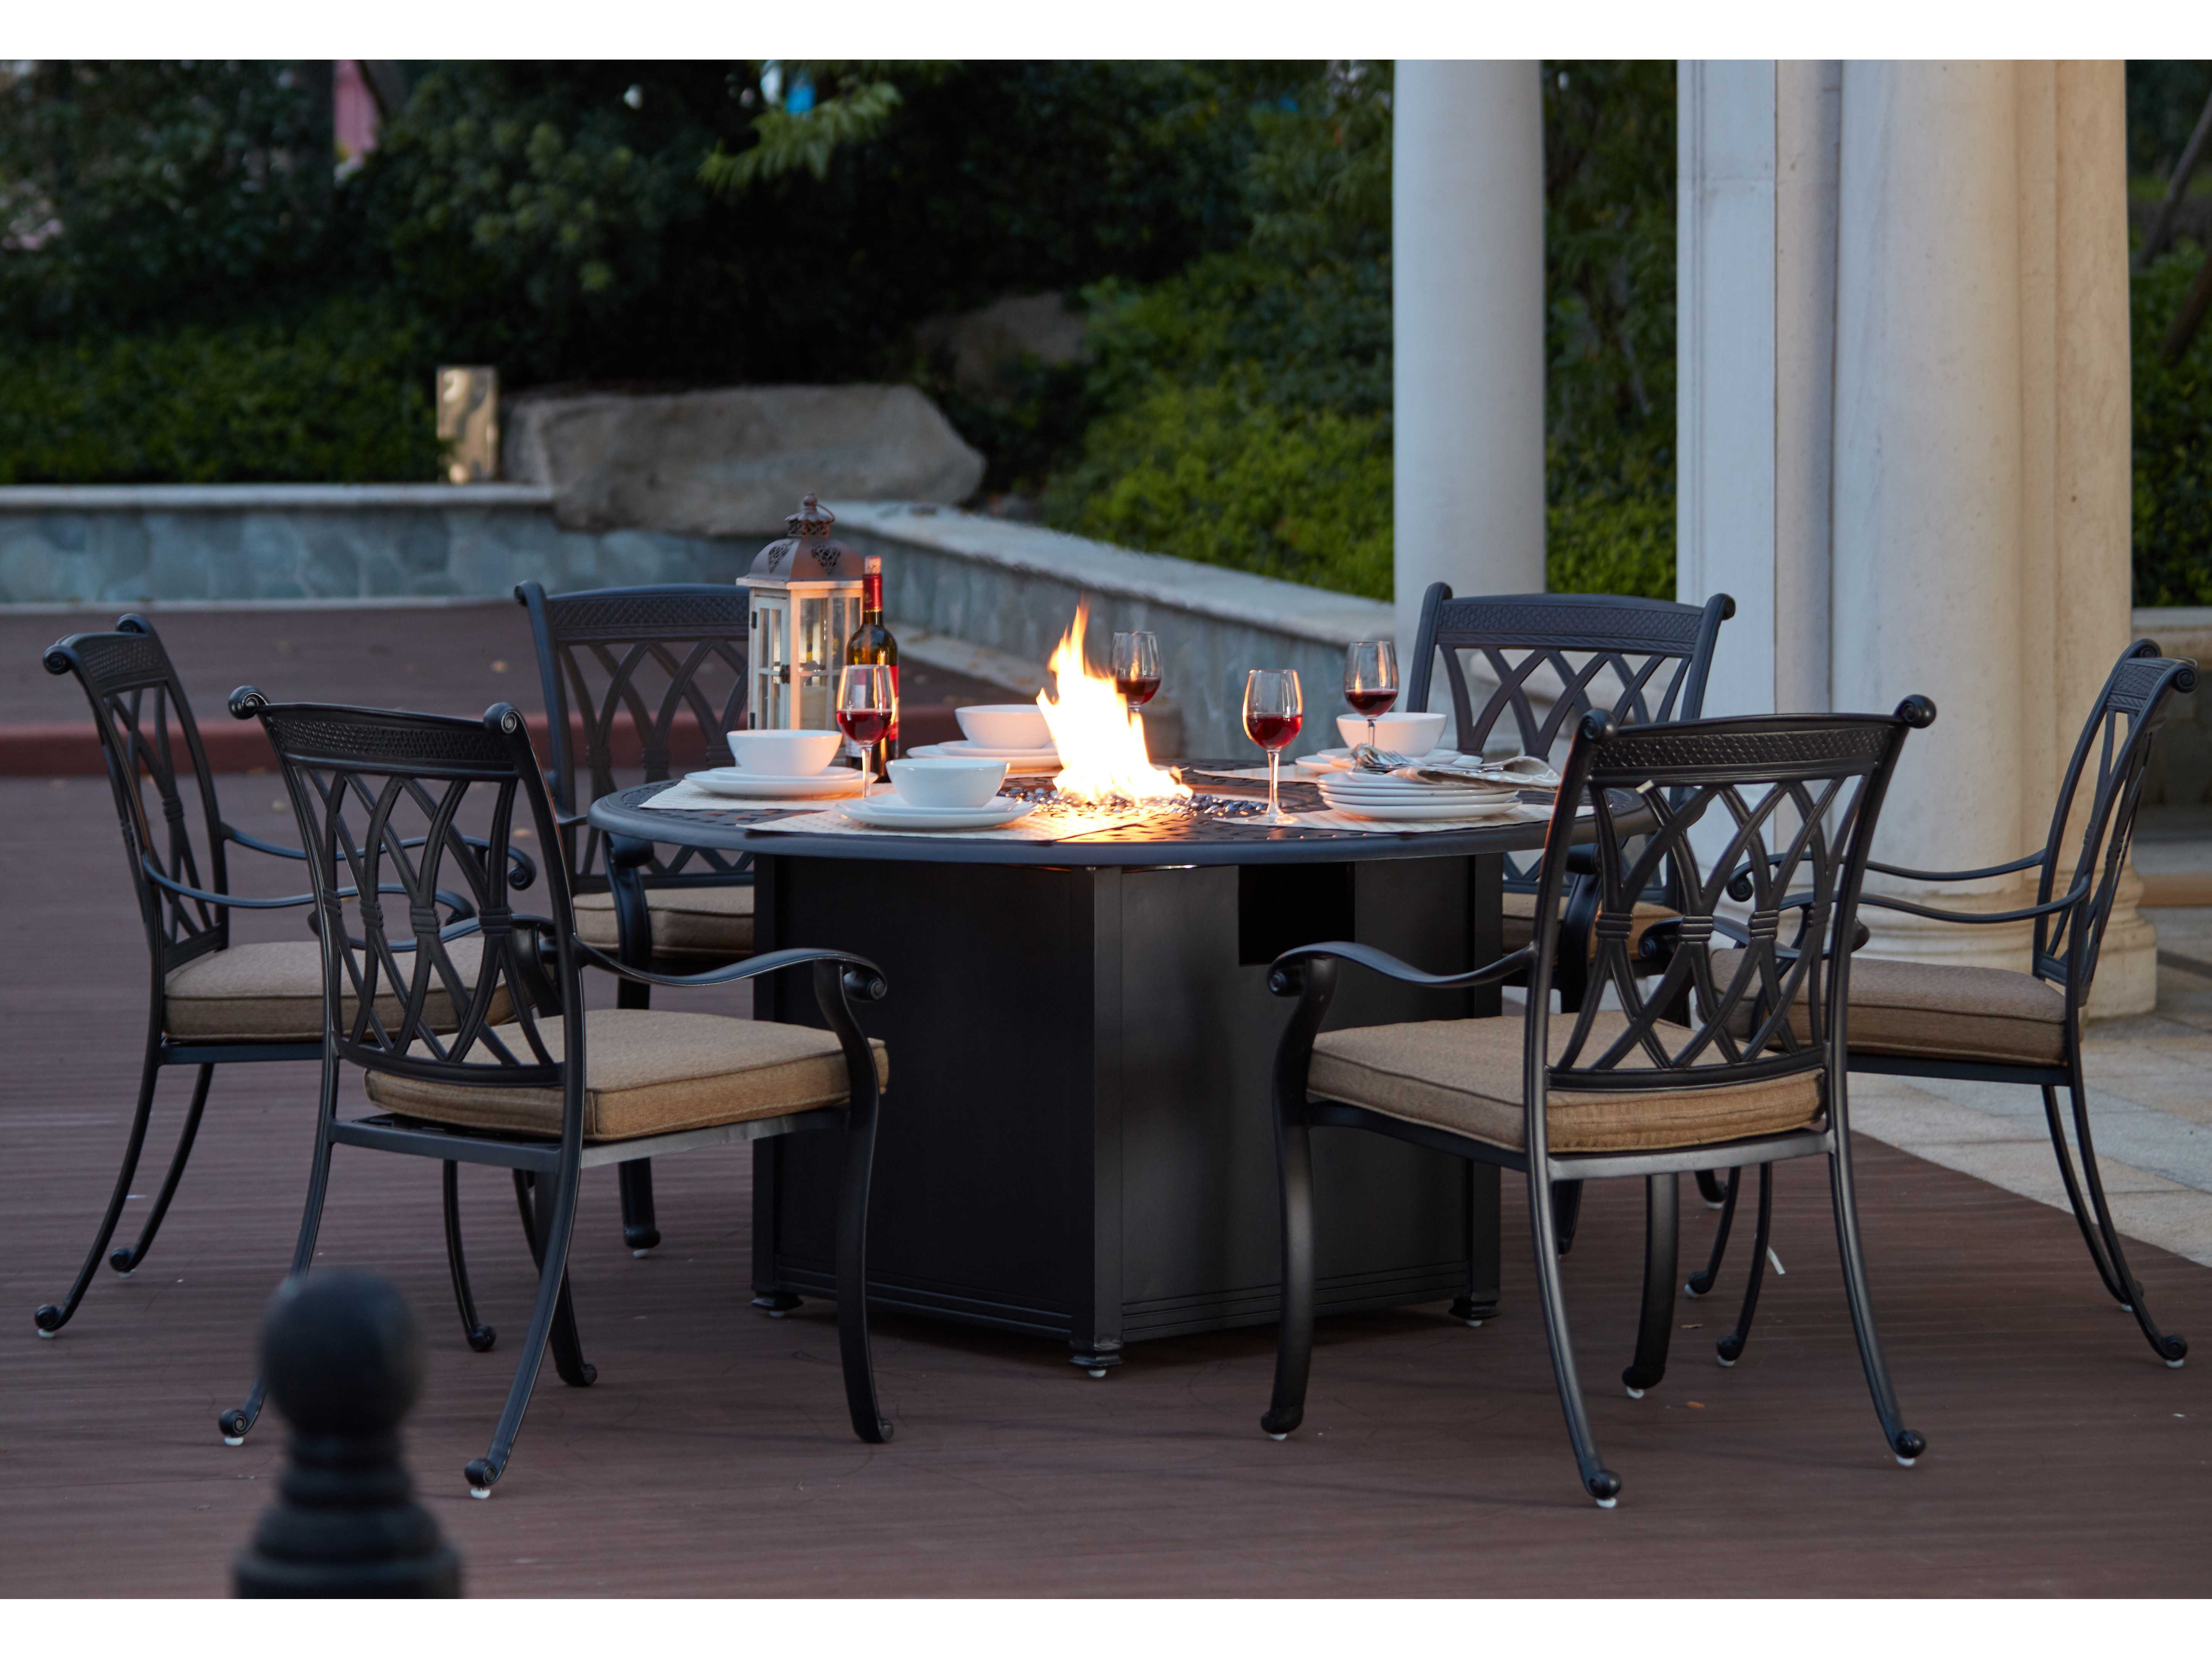 Darlee Outdoor Living Capri Cast, Propane Fire Pit Seating Sets